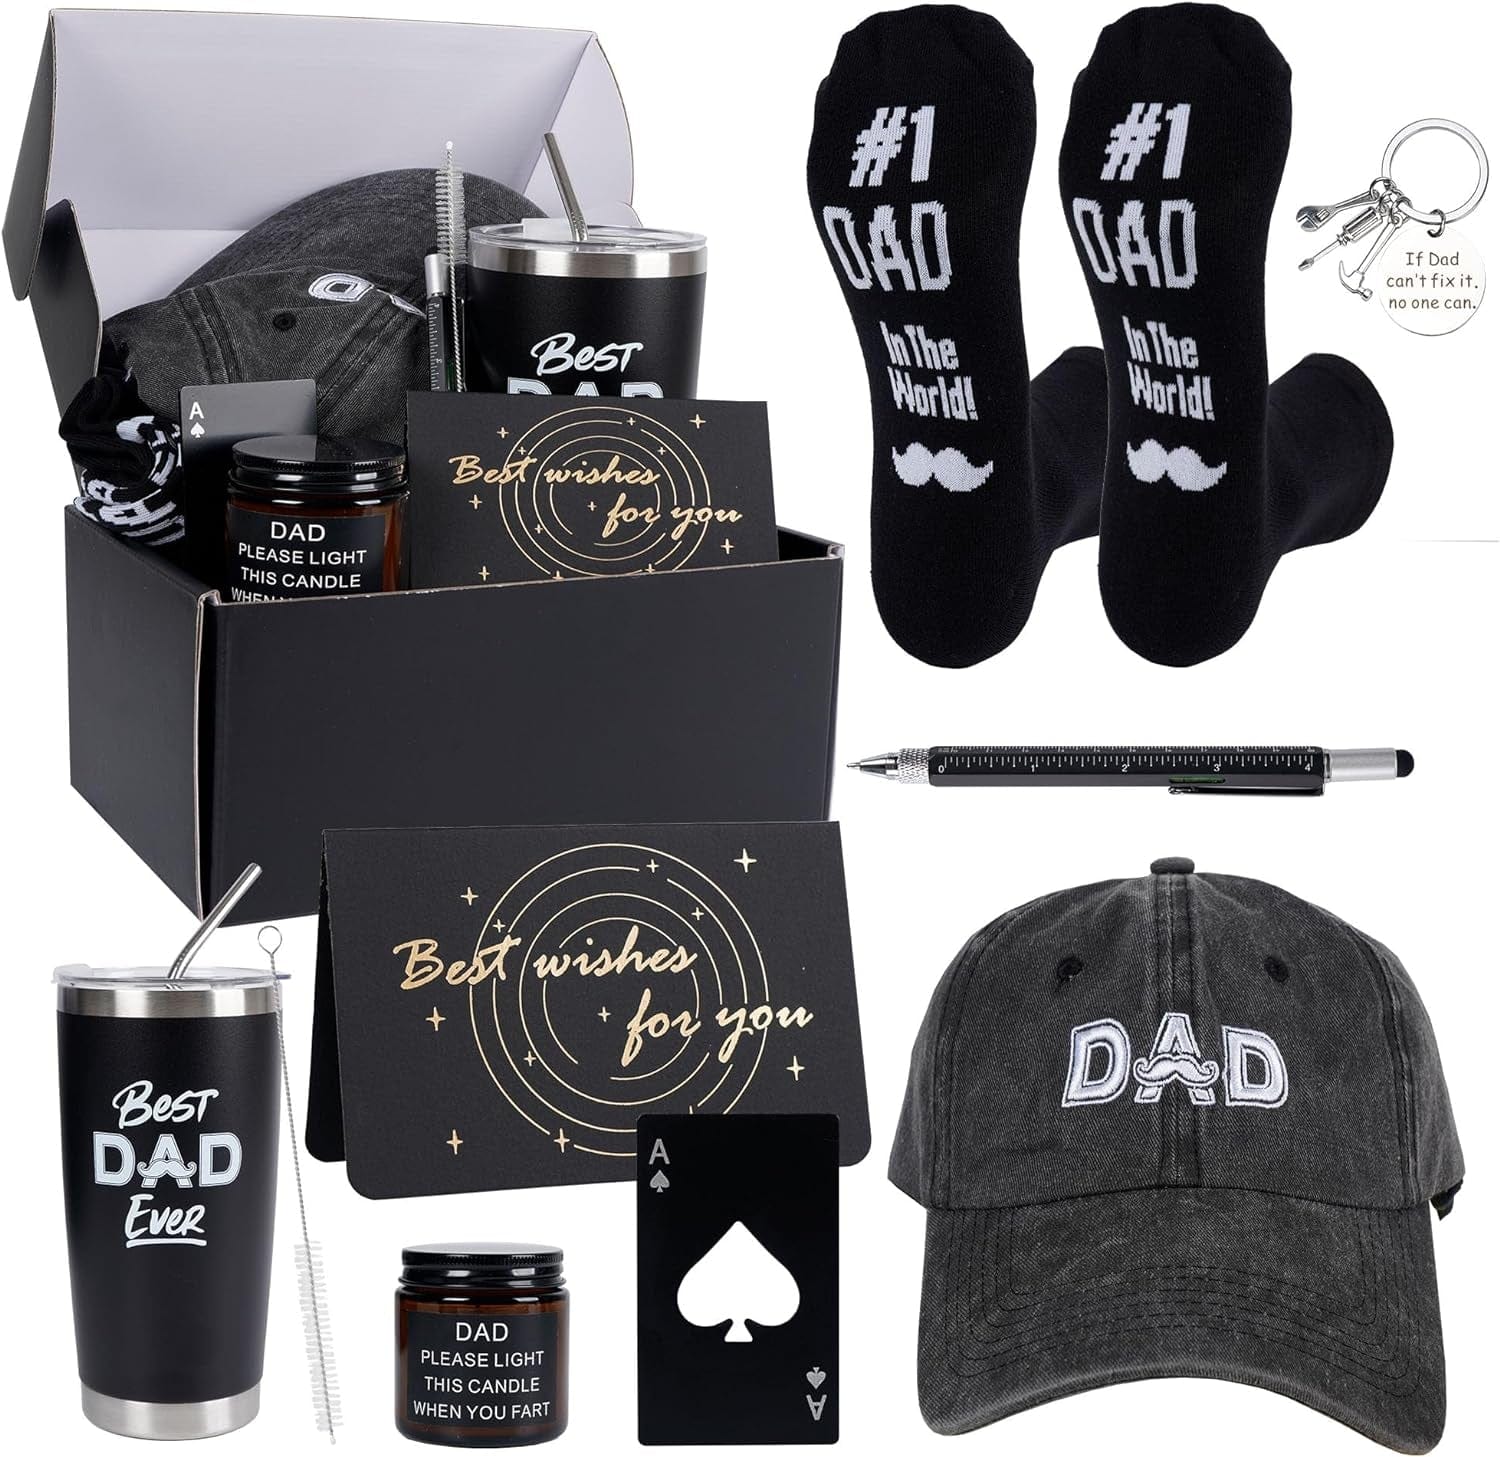 GeckoCustom 9 Pieces Dad Gift Set Best Dad Gifts Christmas Gifts for Dad, Men with Tumbler Mens Socks Mens Baseball Cap Dad Key Chain Card for Men Father Papa Gifts from Son Daughter Kids